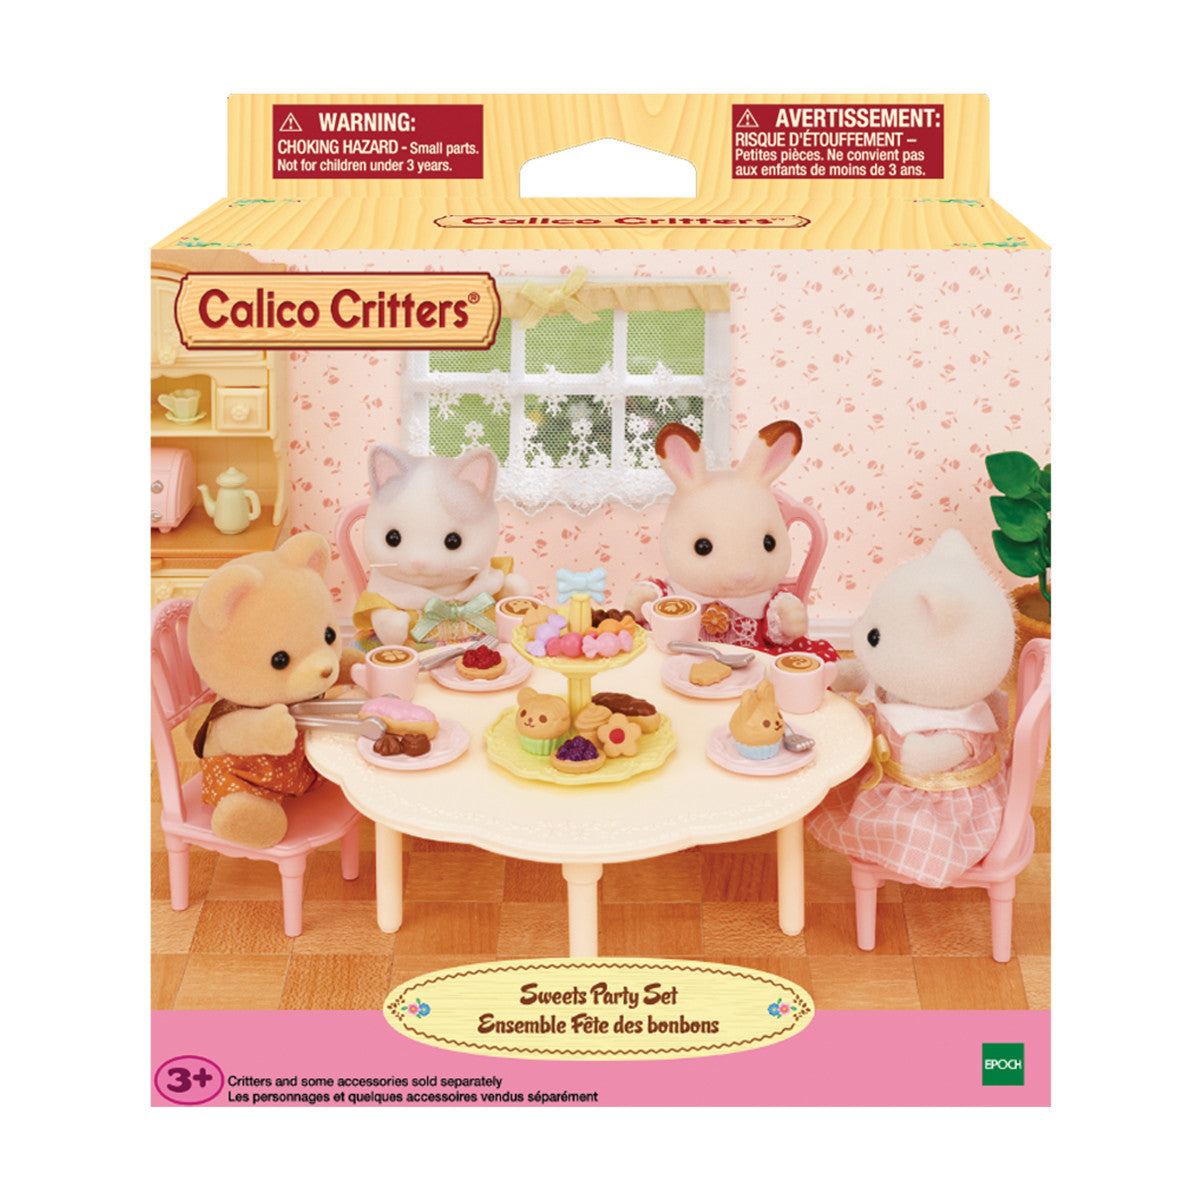 Sweets Party Set - A Child's Delight